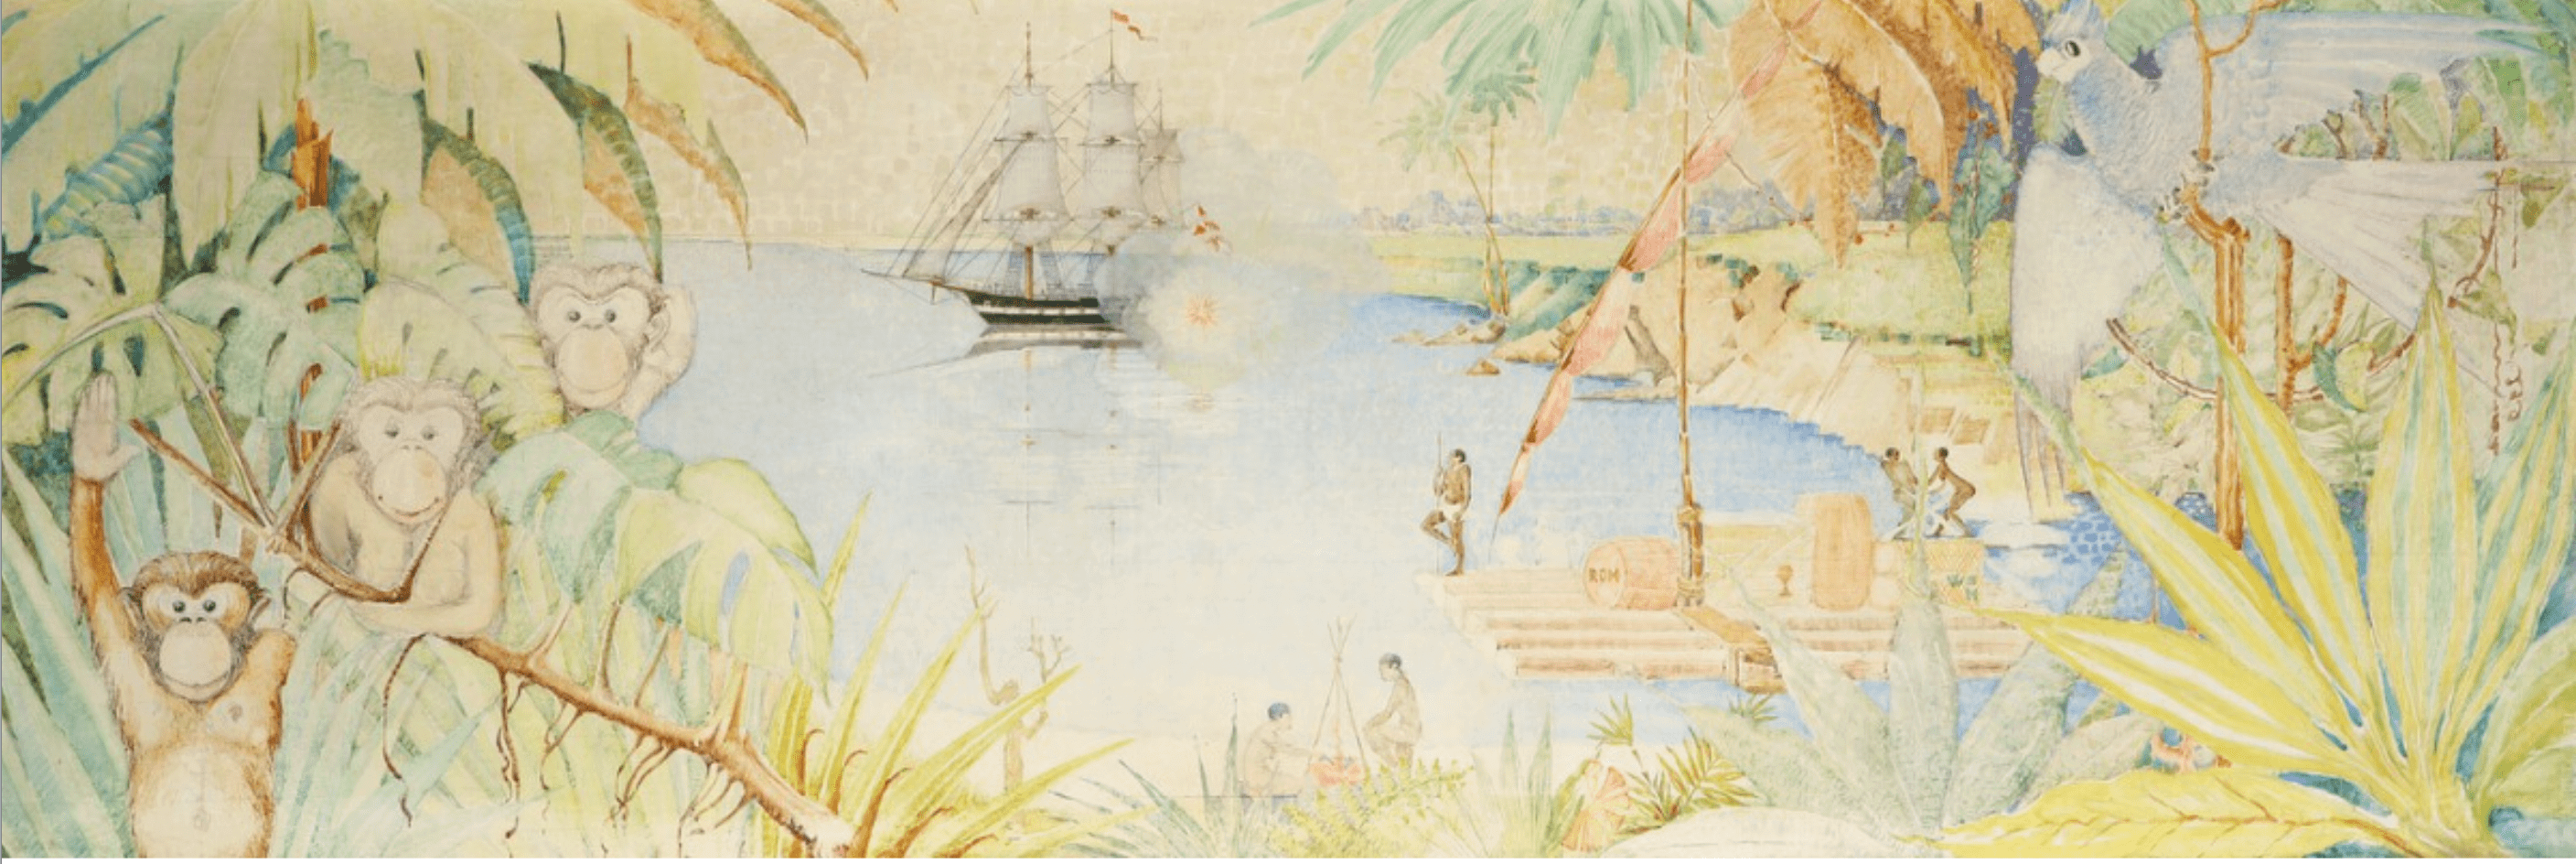 pretty painting of danish West Indies